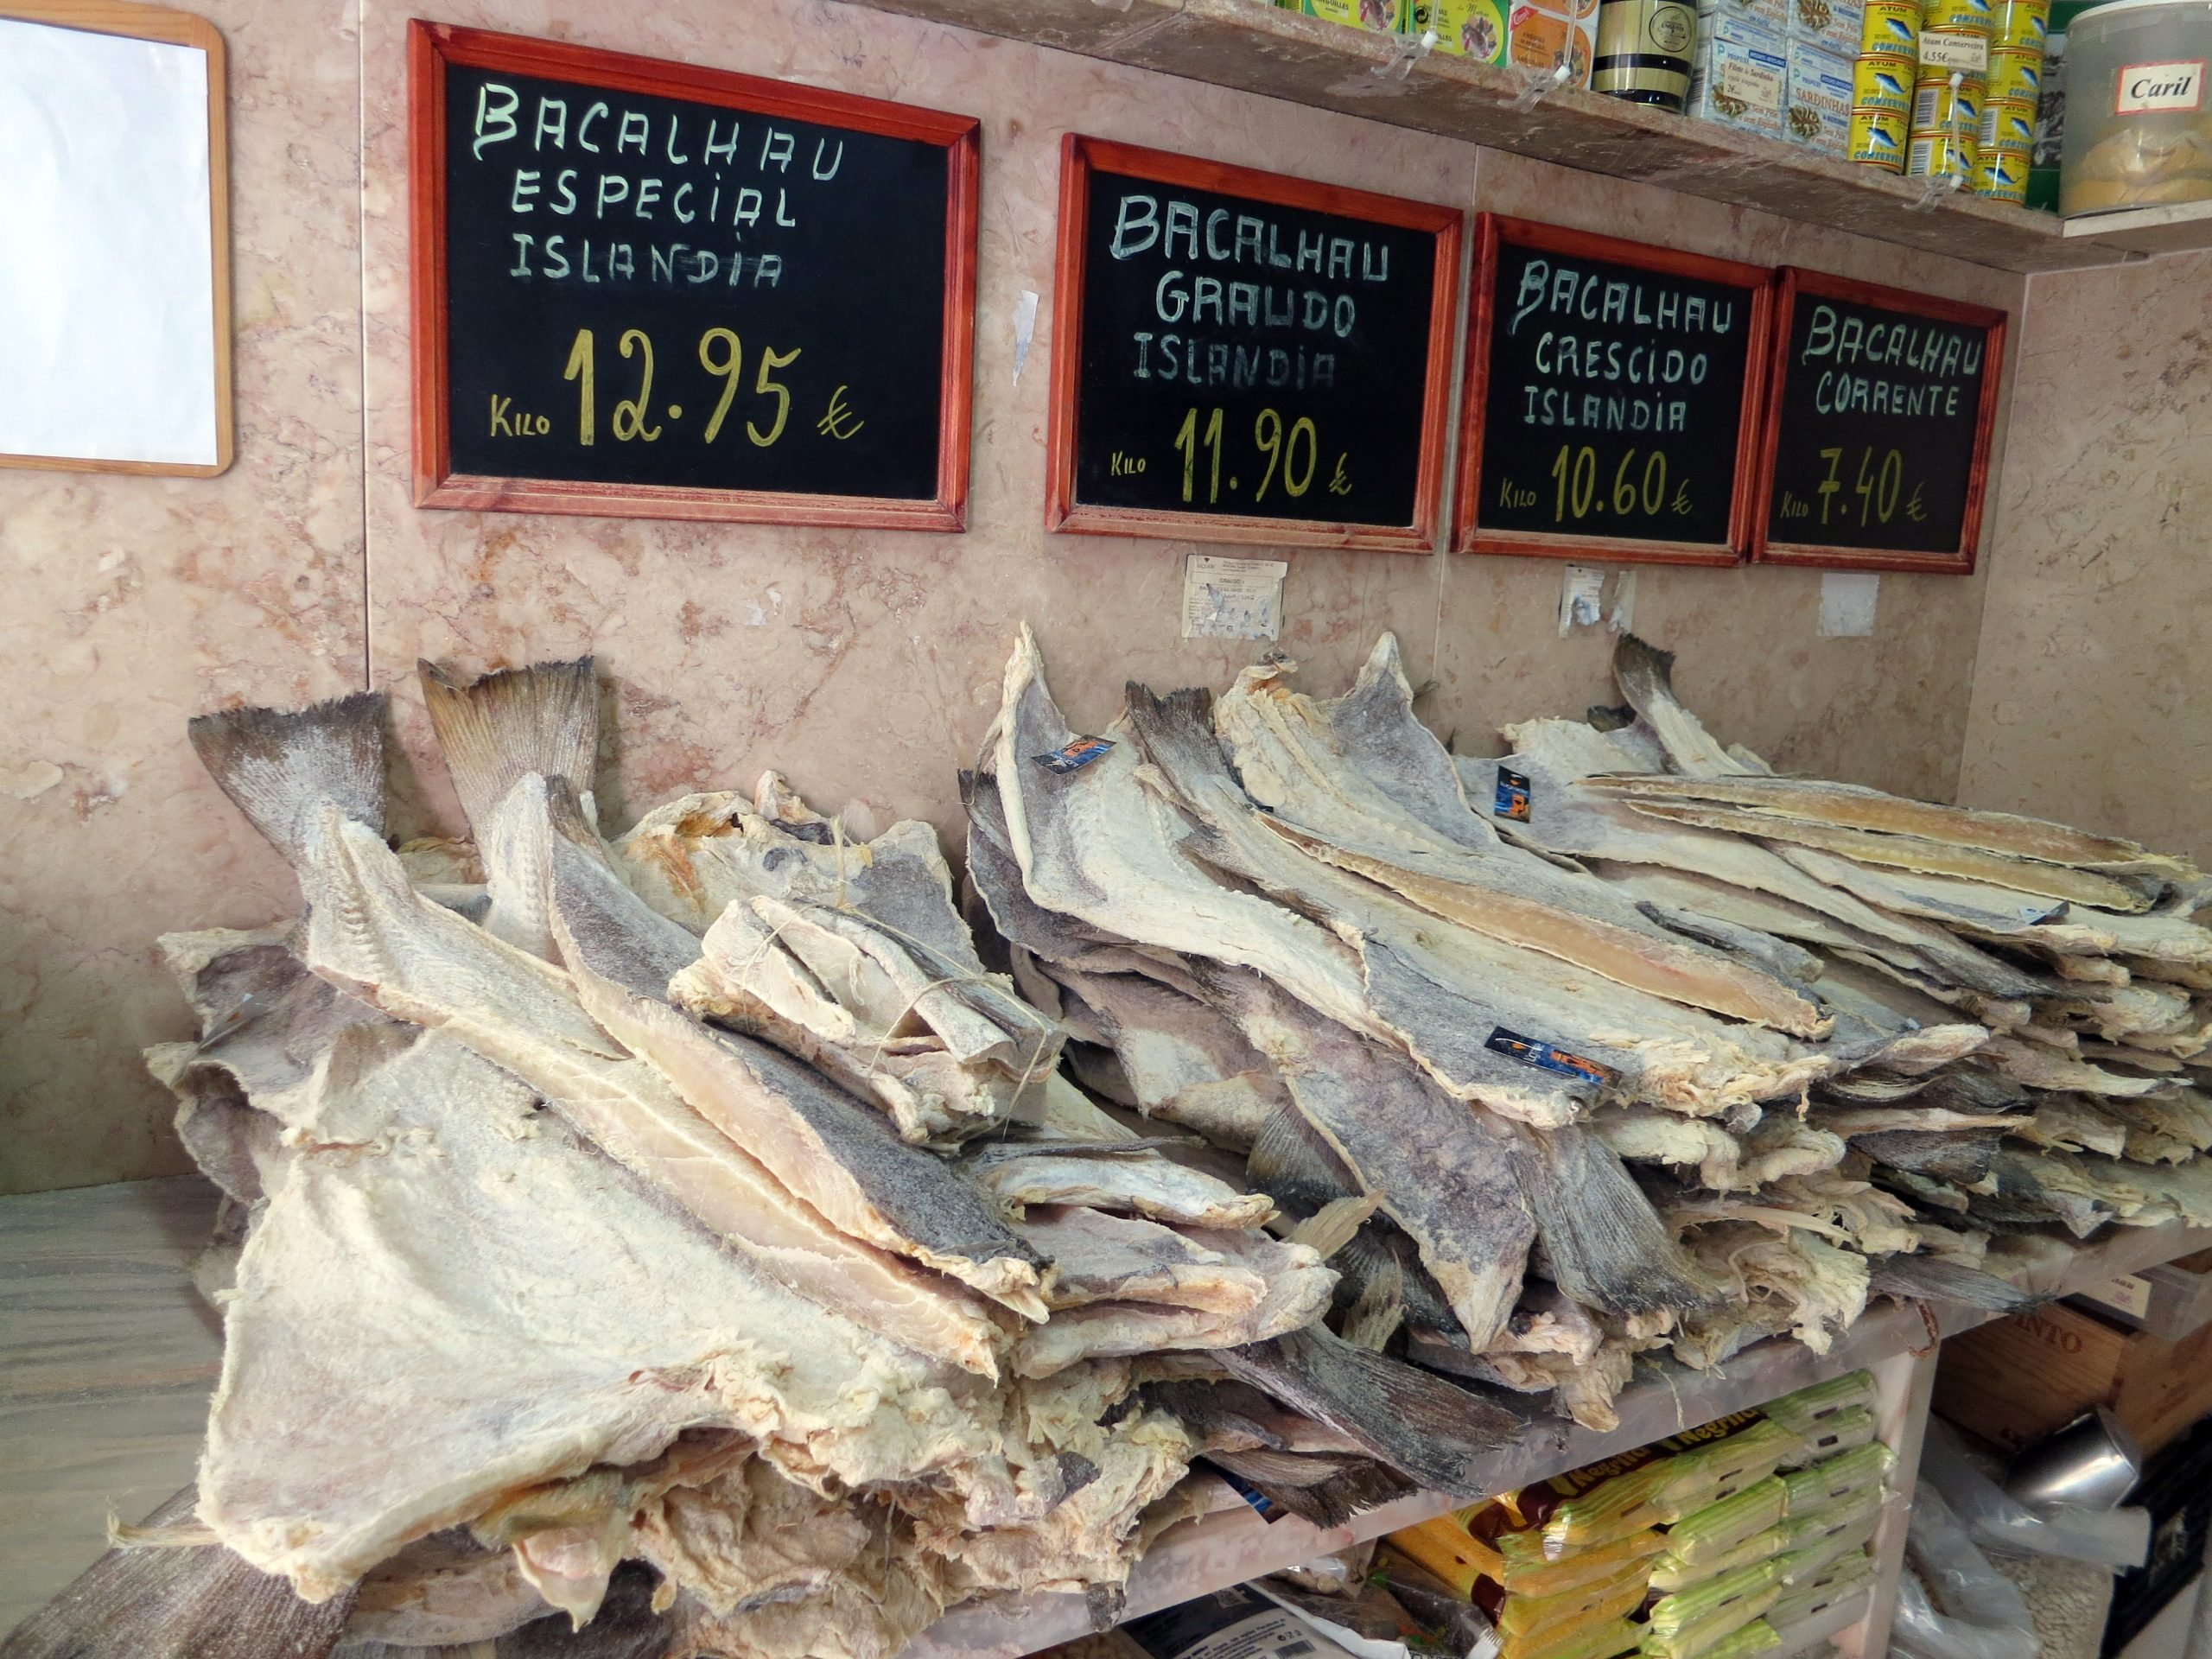 Bacalhau: Understanding the Portuguese Obsession with Cod - Portugal.com